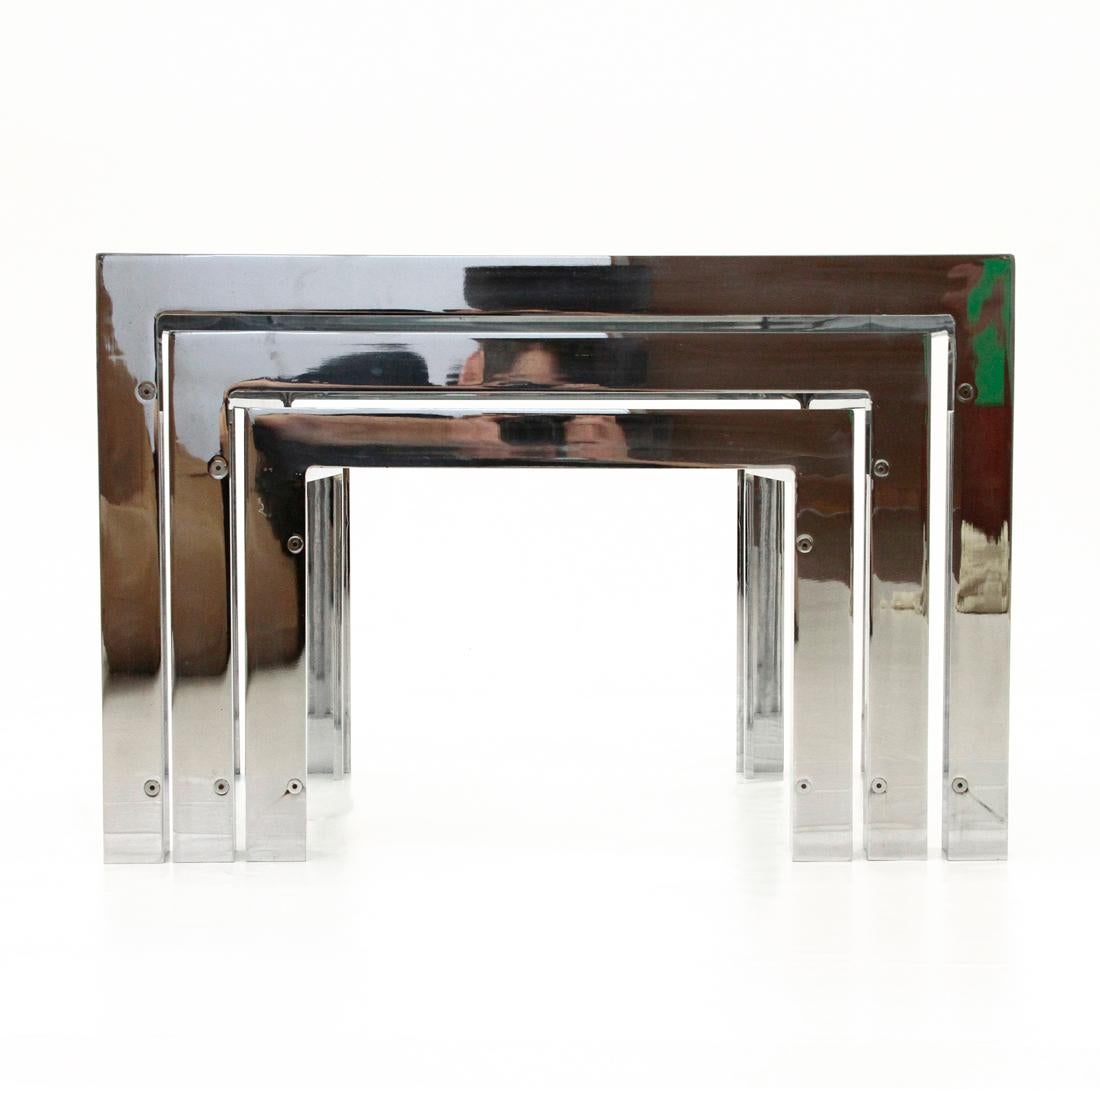 Set of three nesting tables produced in the 1970s by Saporiti based on a project by Alberto Rosselli.
Steel structure.
Thick glass top.
Good general condition, some signs and traces of rust due to normal use over time.

Dimensions:
Length 60